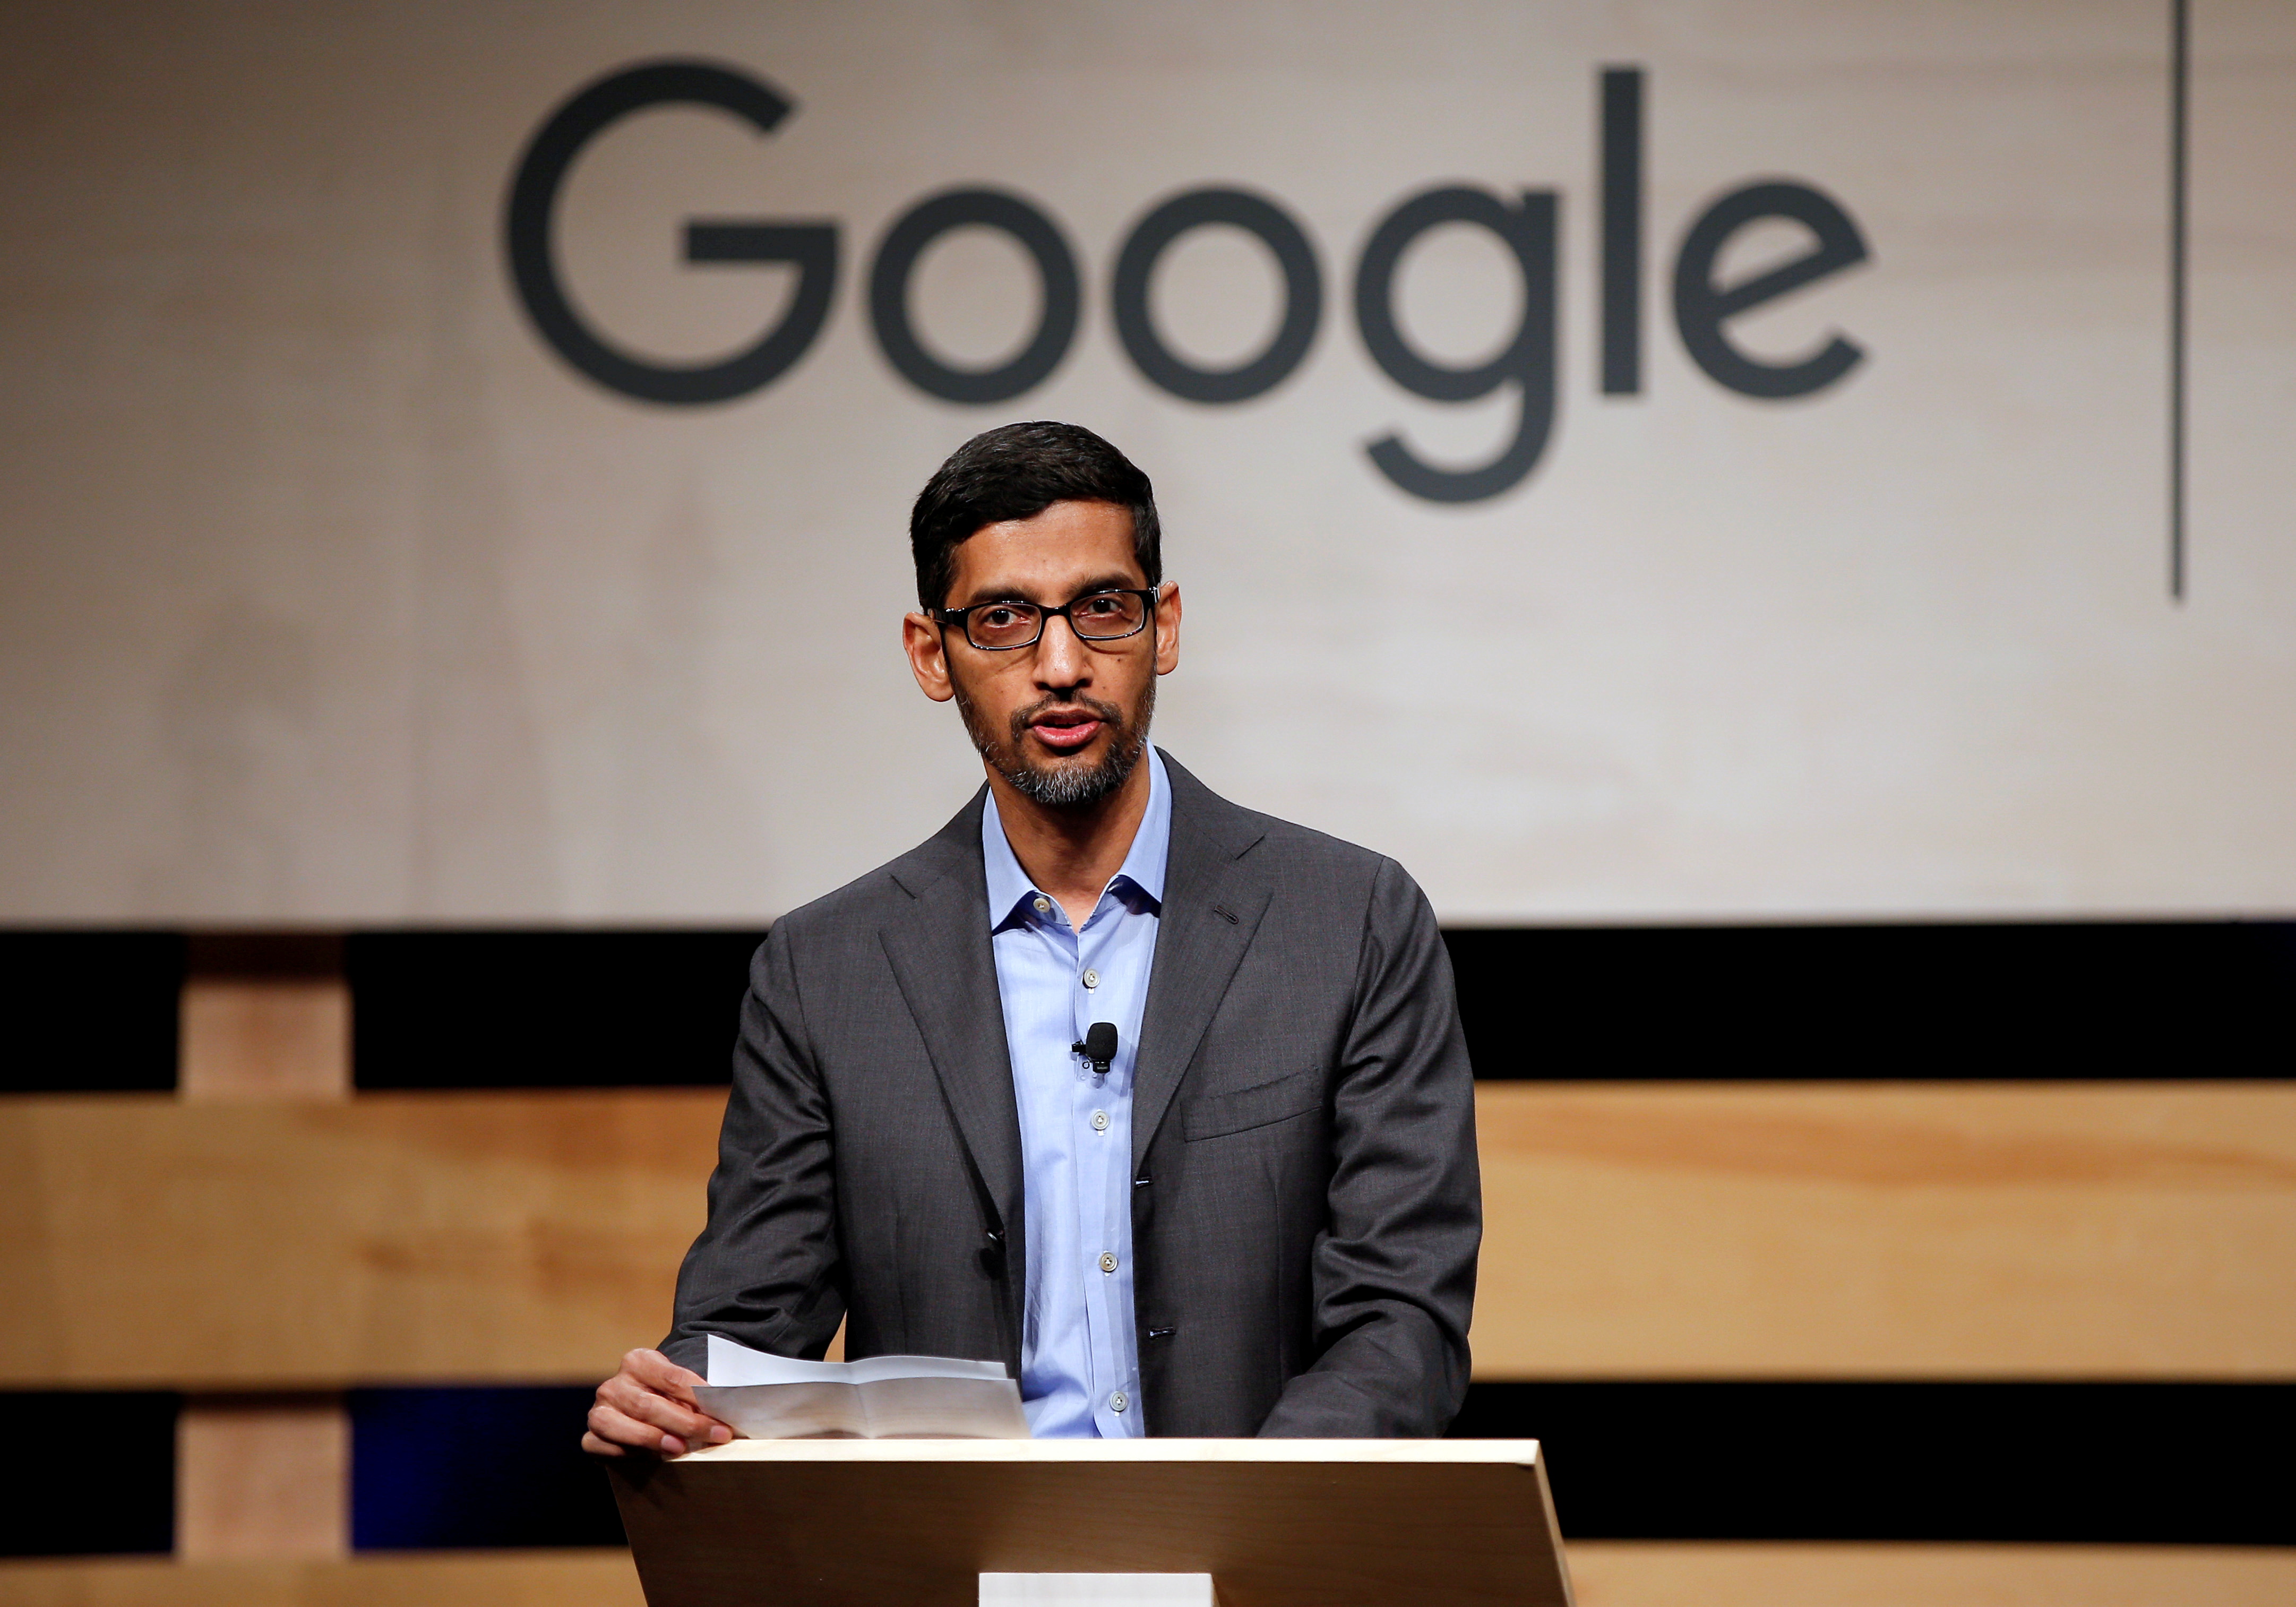 Alphabet CEO Pichai can be questioned in privacy lawsuit, judge rules |  Reuters